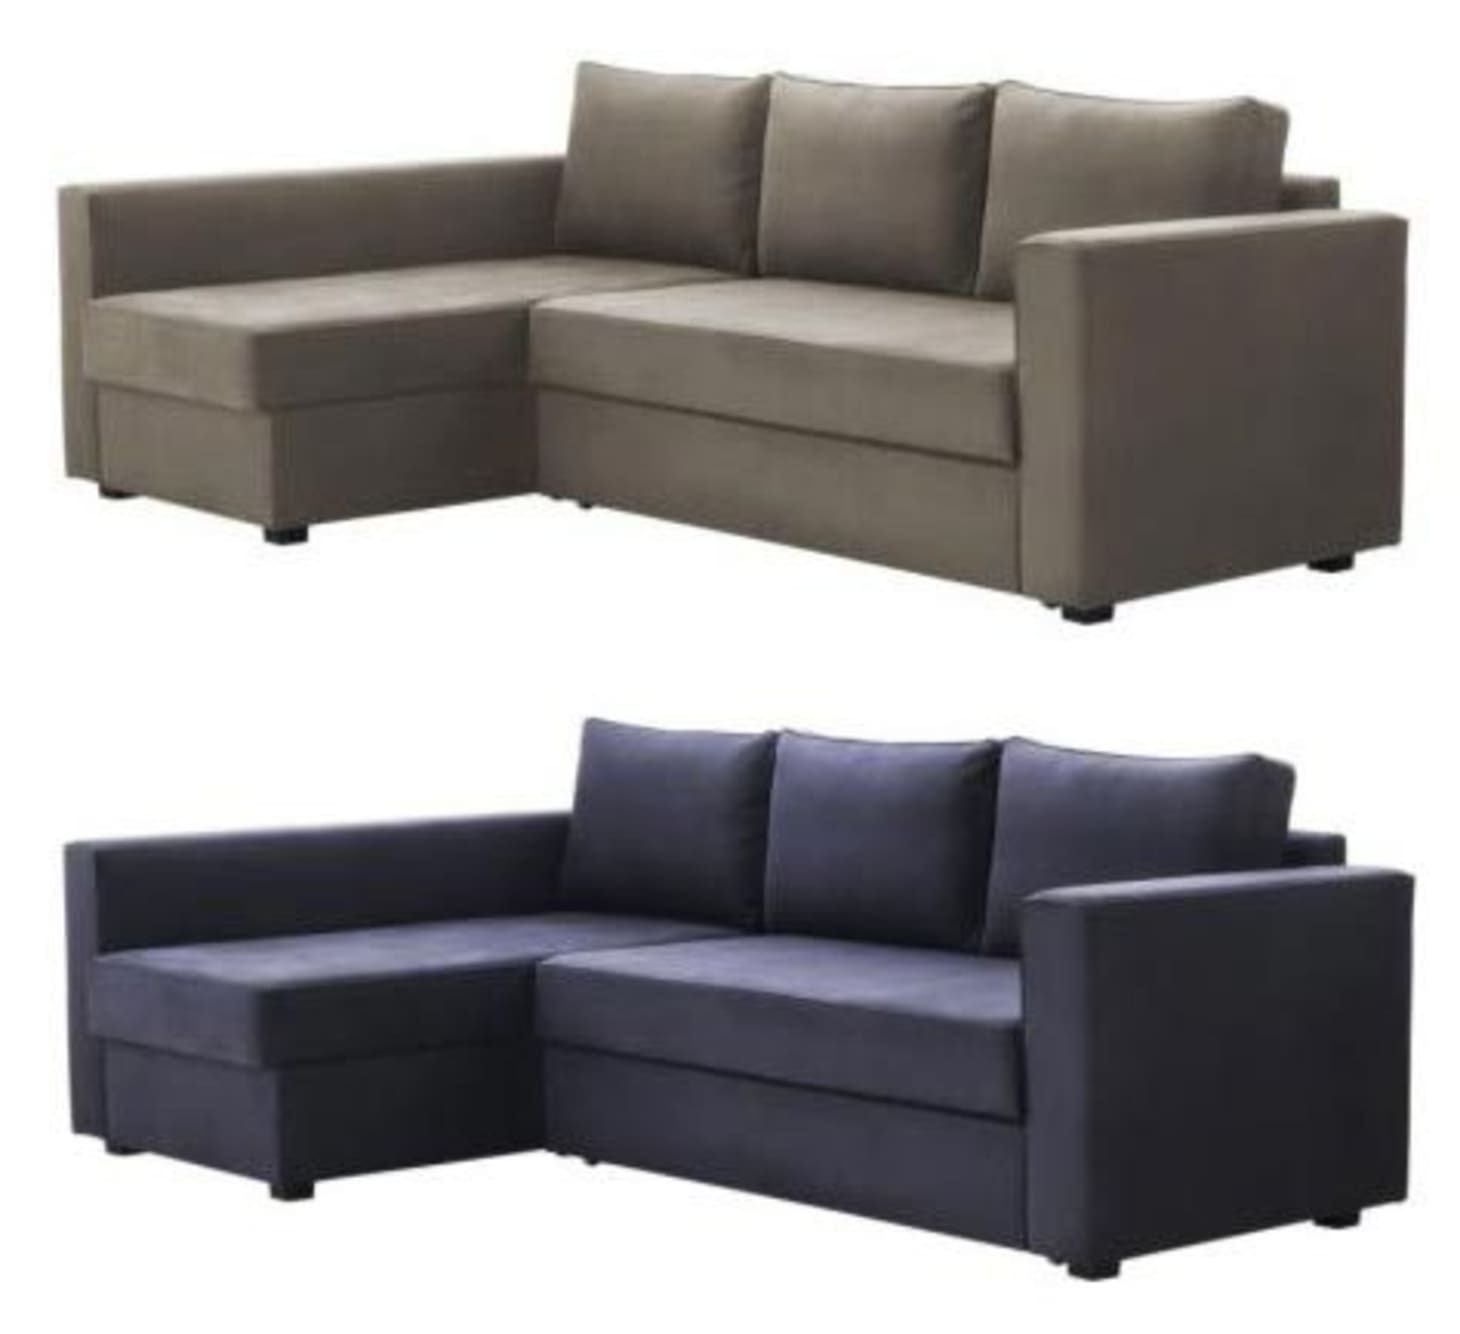 Manstad Sectional Sofa Bed & Storage From Ikea | Apartment Regarding Celine Sectional Futon Sofas With Storage Reclining Couch (View 10 of 15)